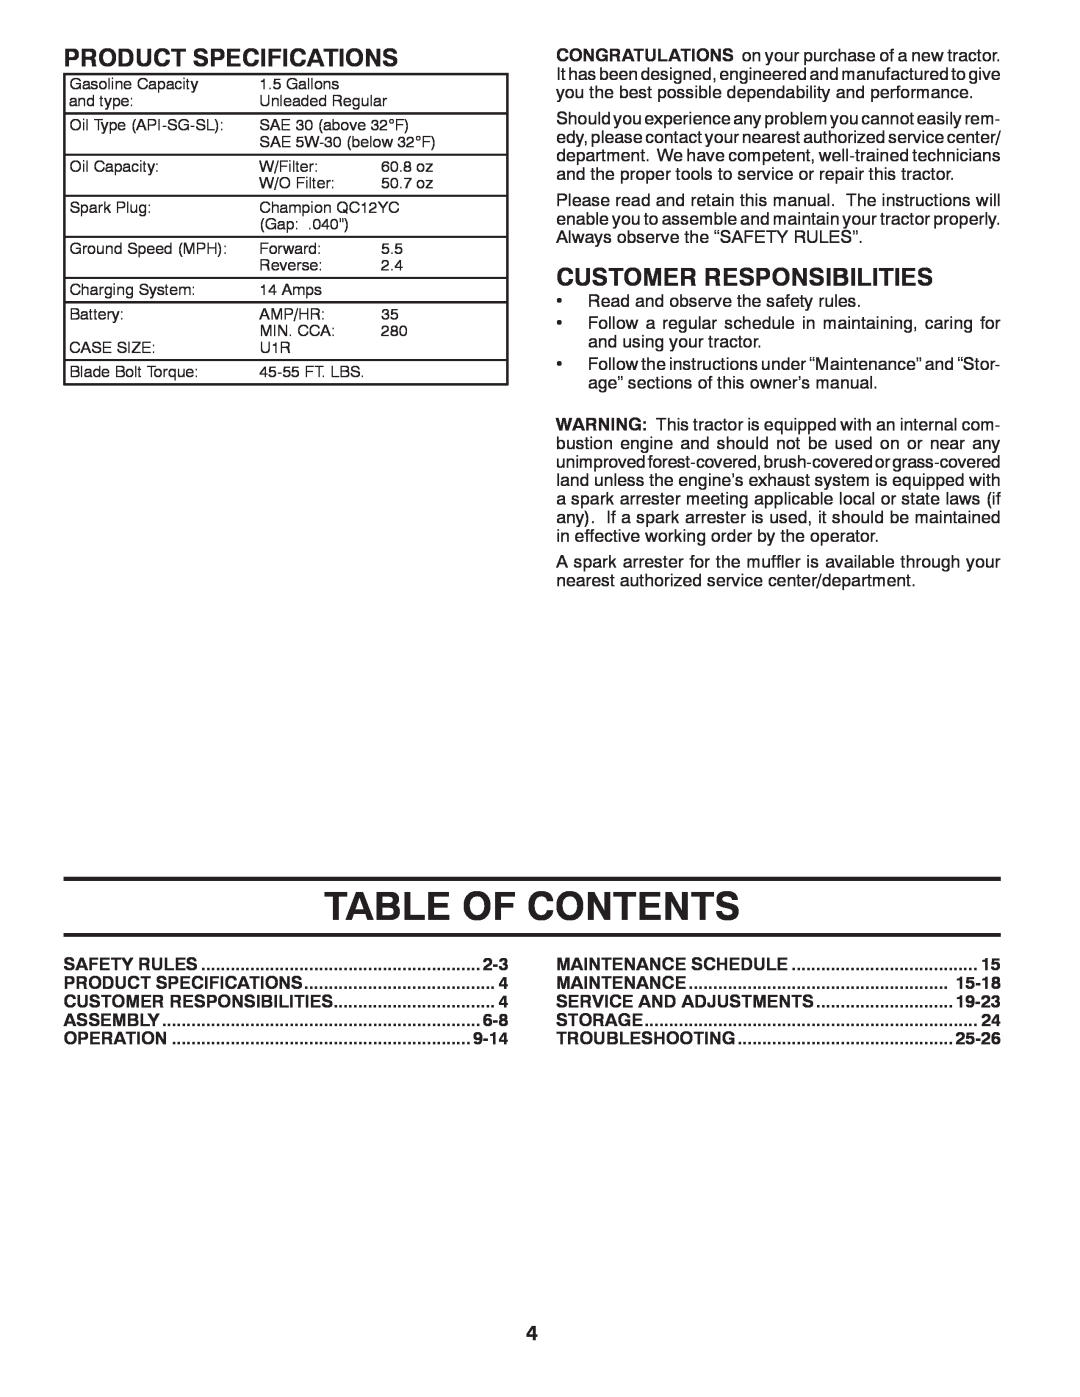 Husqvarna LTH1842 manual Table Of Contents, Product Specifications, Customer Responsibilities 